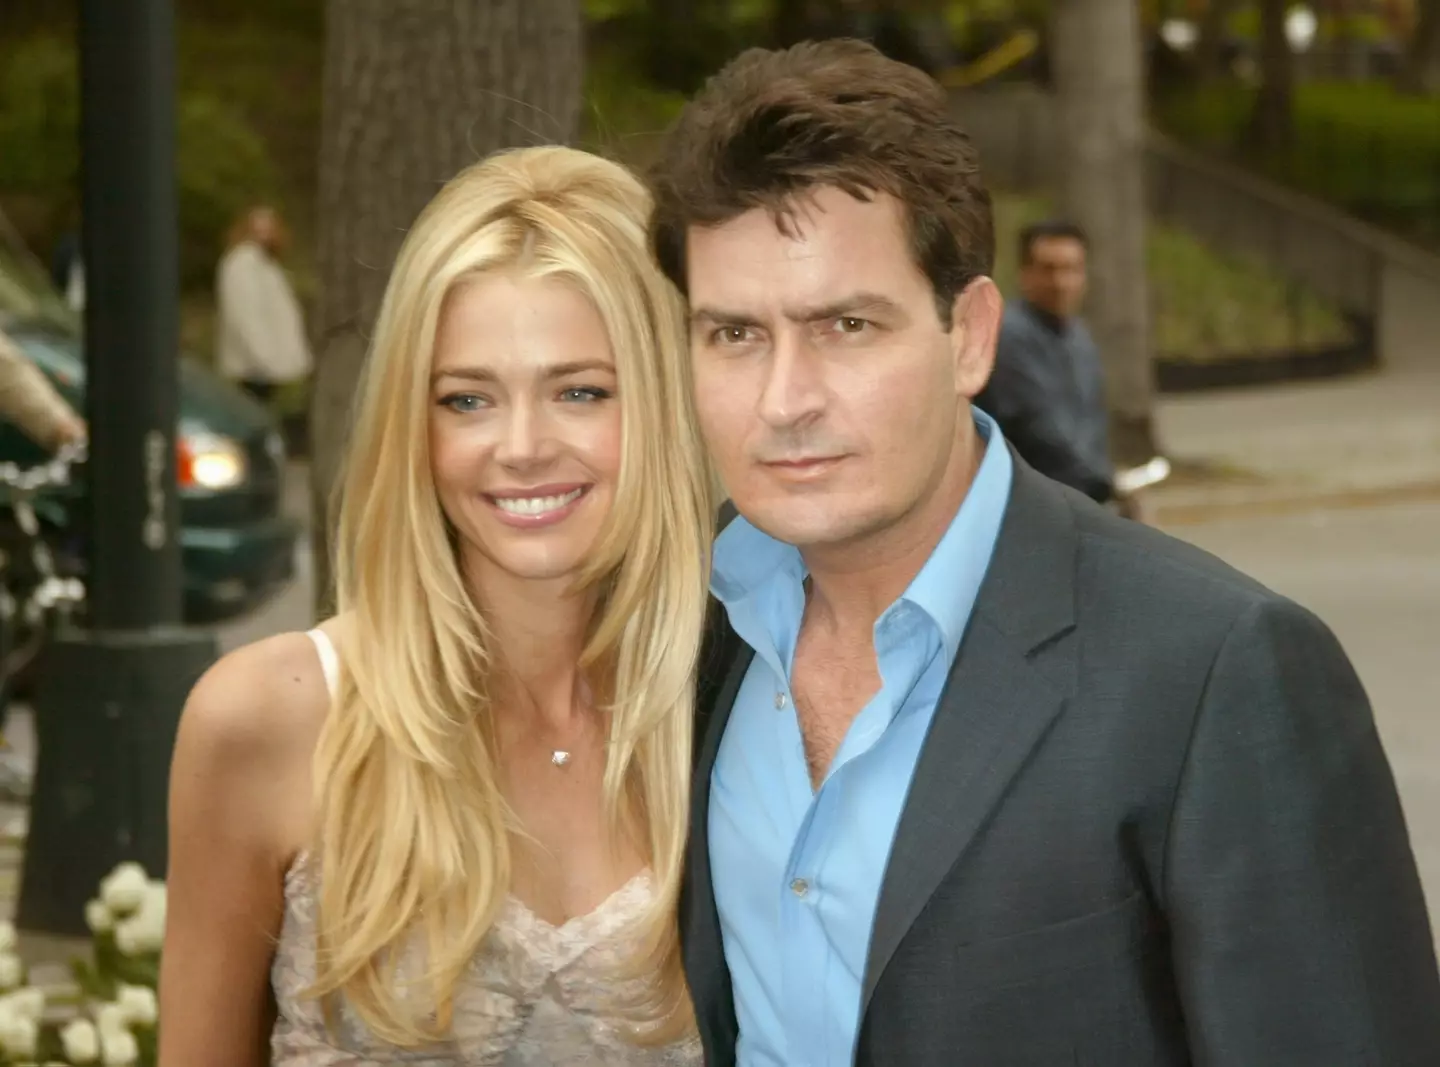 Sheen's ex wife, Denise Richards, convinced him to do the show.